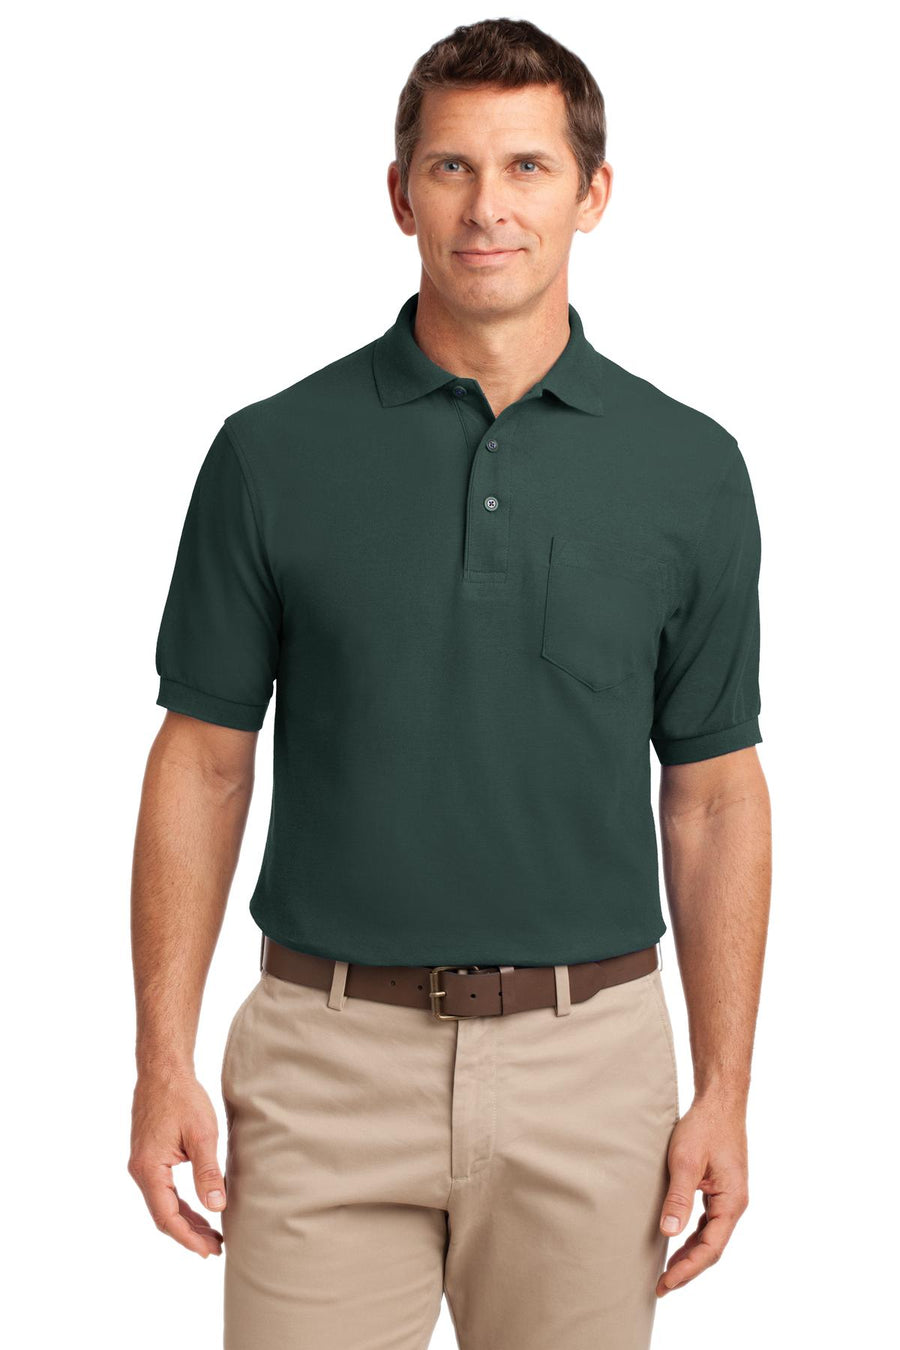 Port Authority Tall Silk Touch Polo with Pocket.